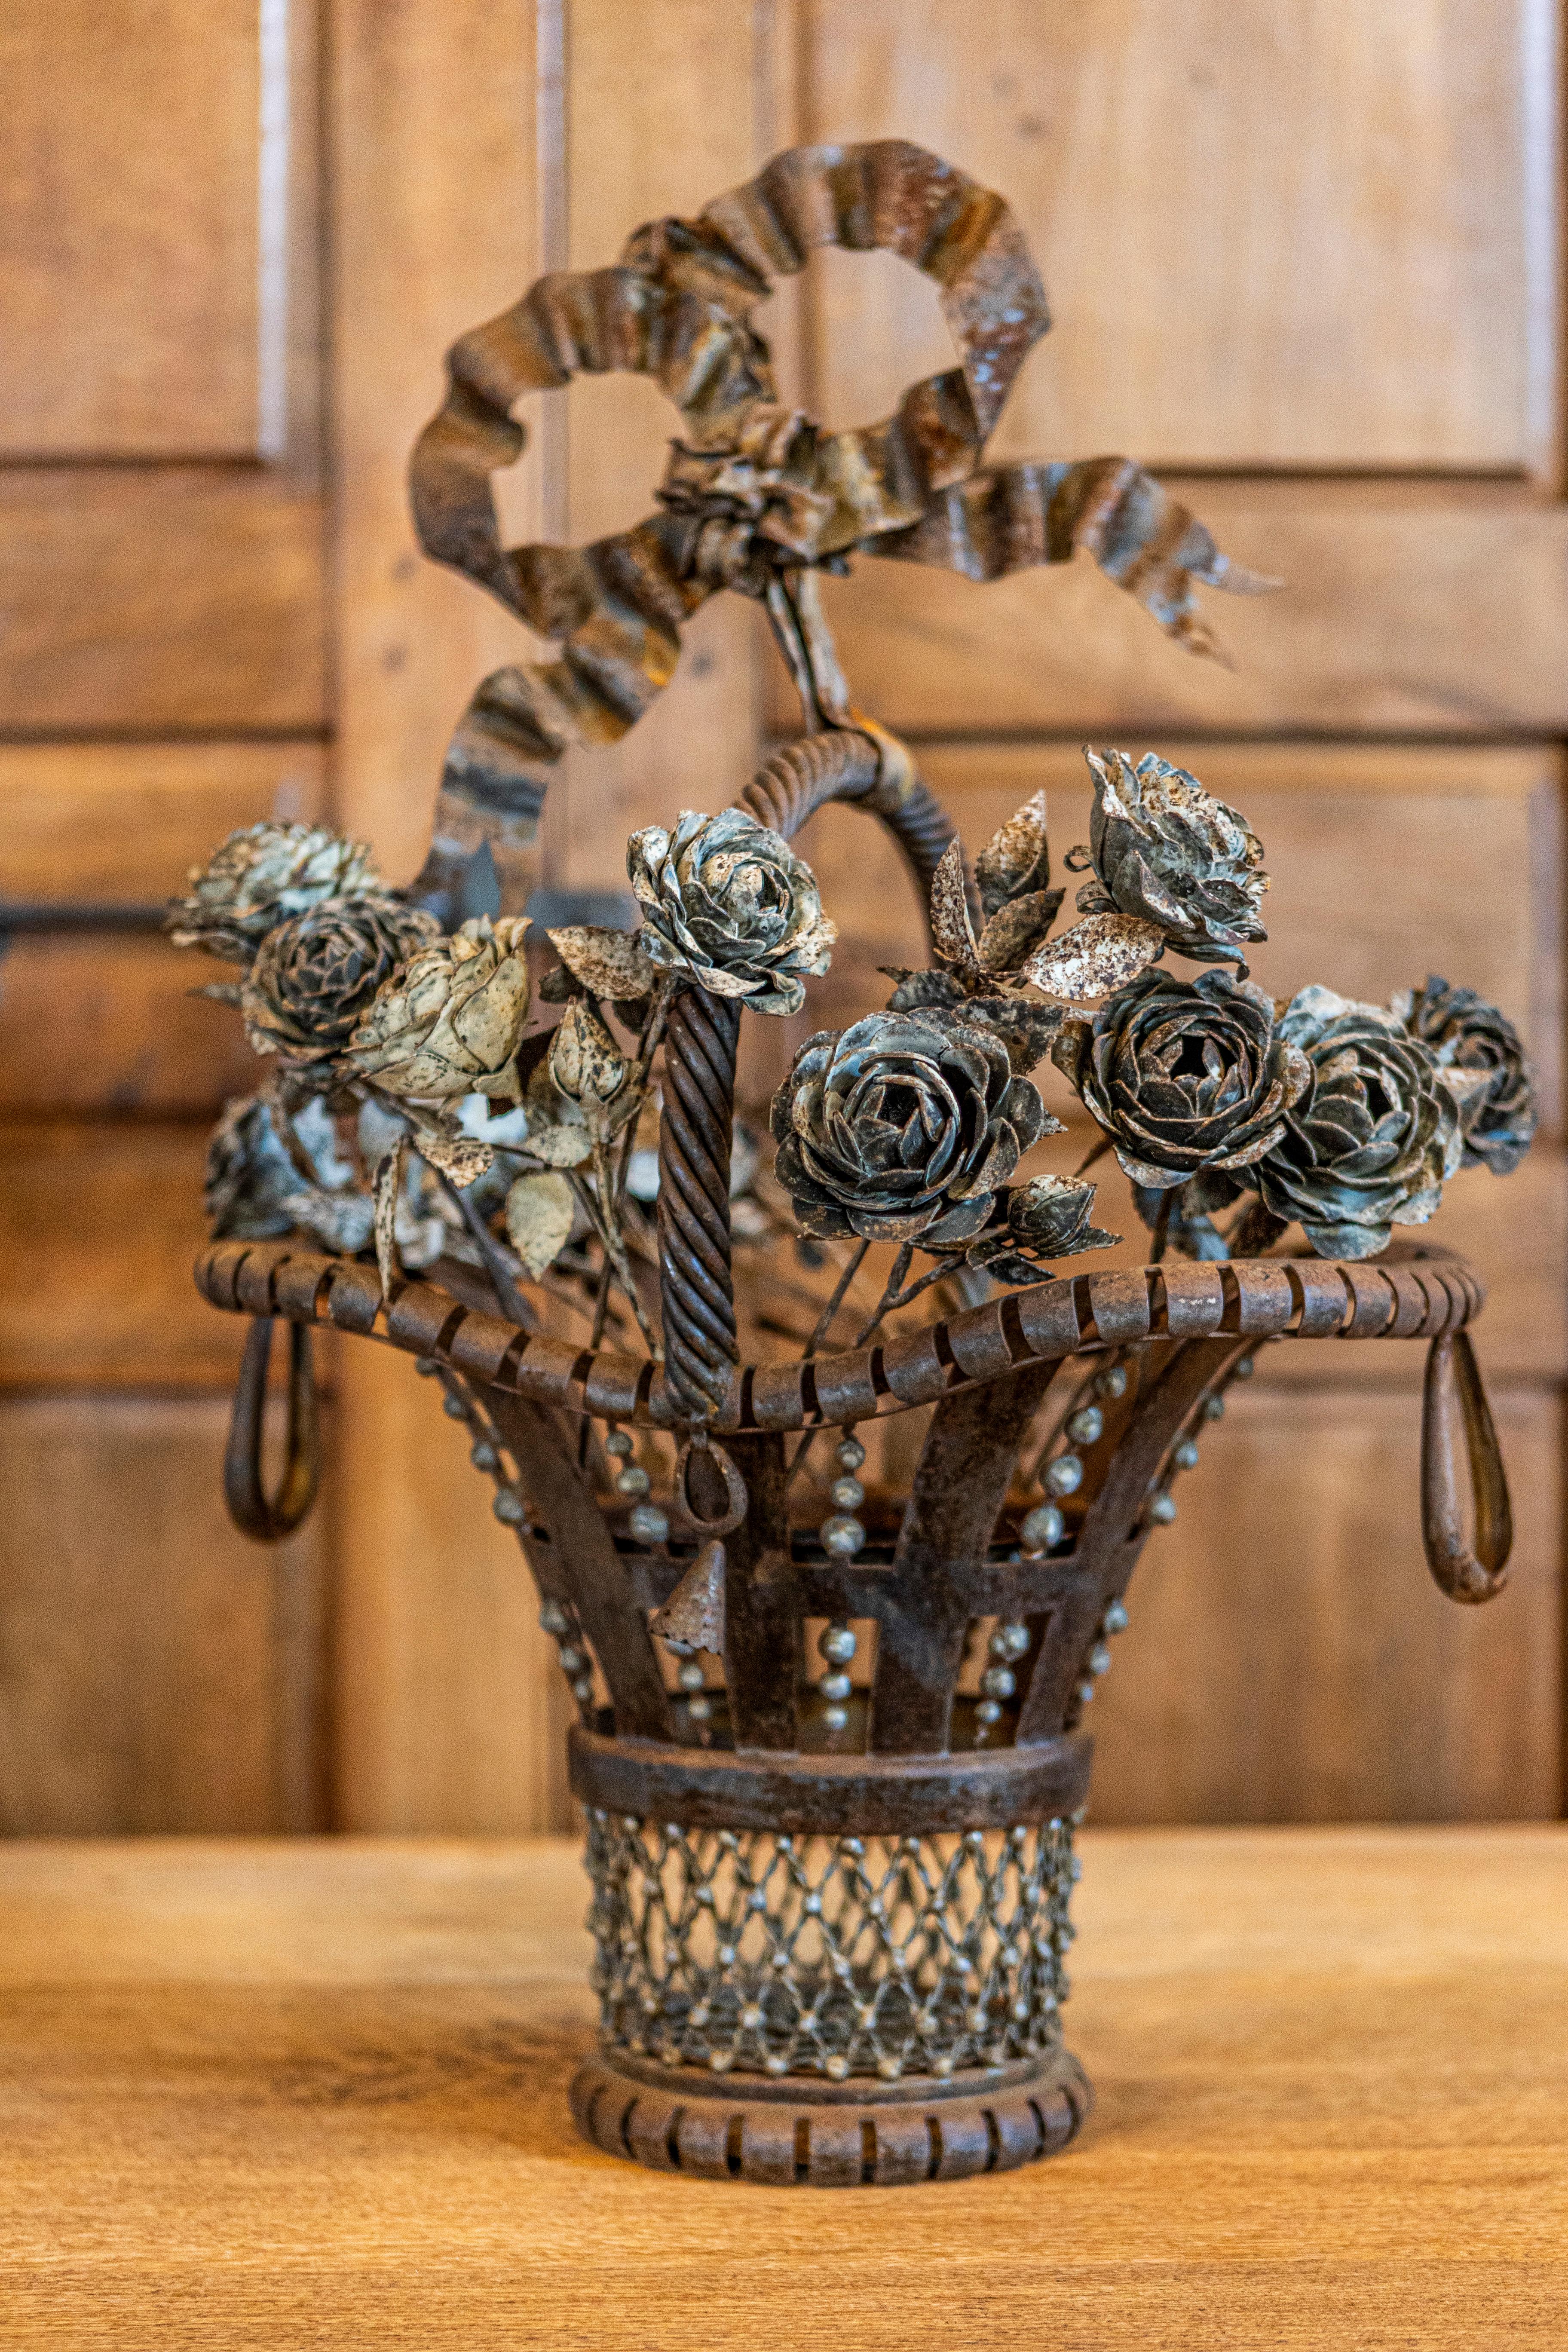 A French wrought iron decorative basket from the 19th century with Louis XVI ribbon, roses and rustic character. This 19th-century French wrought iron decorative basket is a beautiful testament to the elegance of Louis XVI design, blending timeless